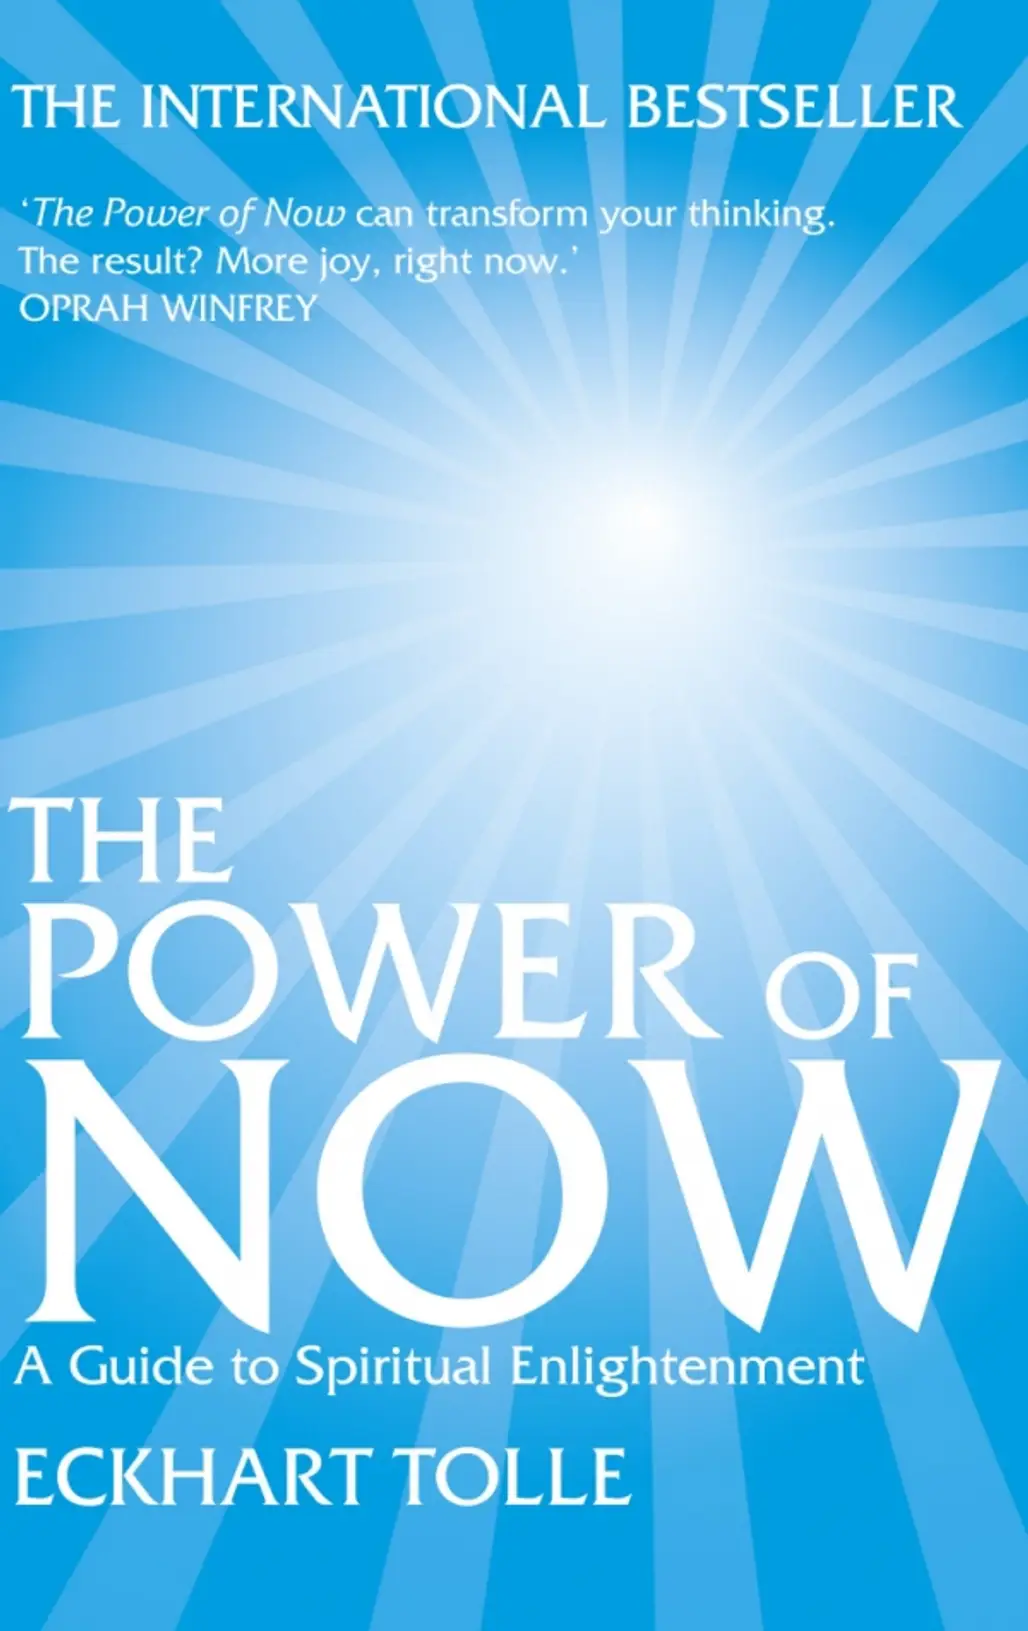 Eckhart Tolle – the Power of Now: a Guide to Spiritual Enlightenment